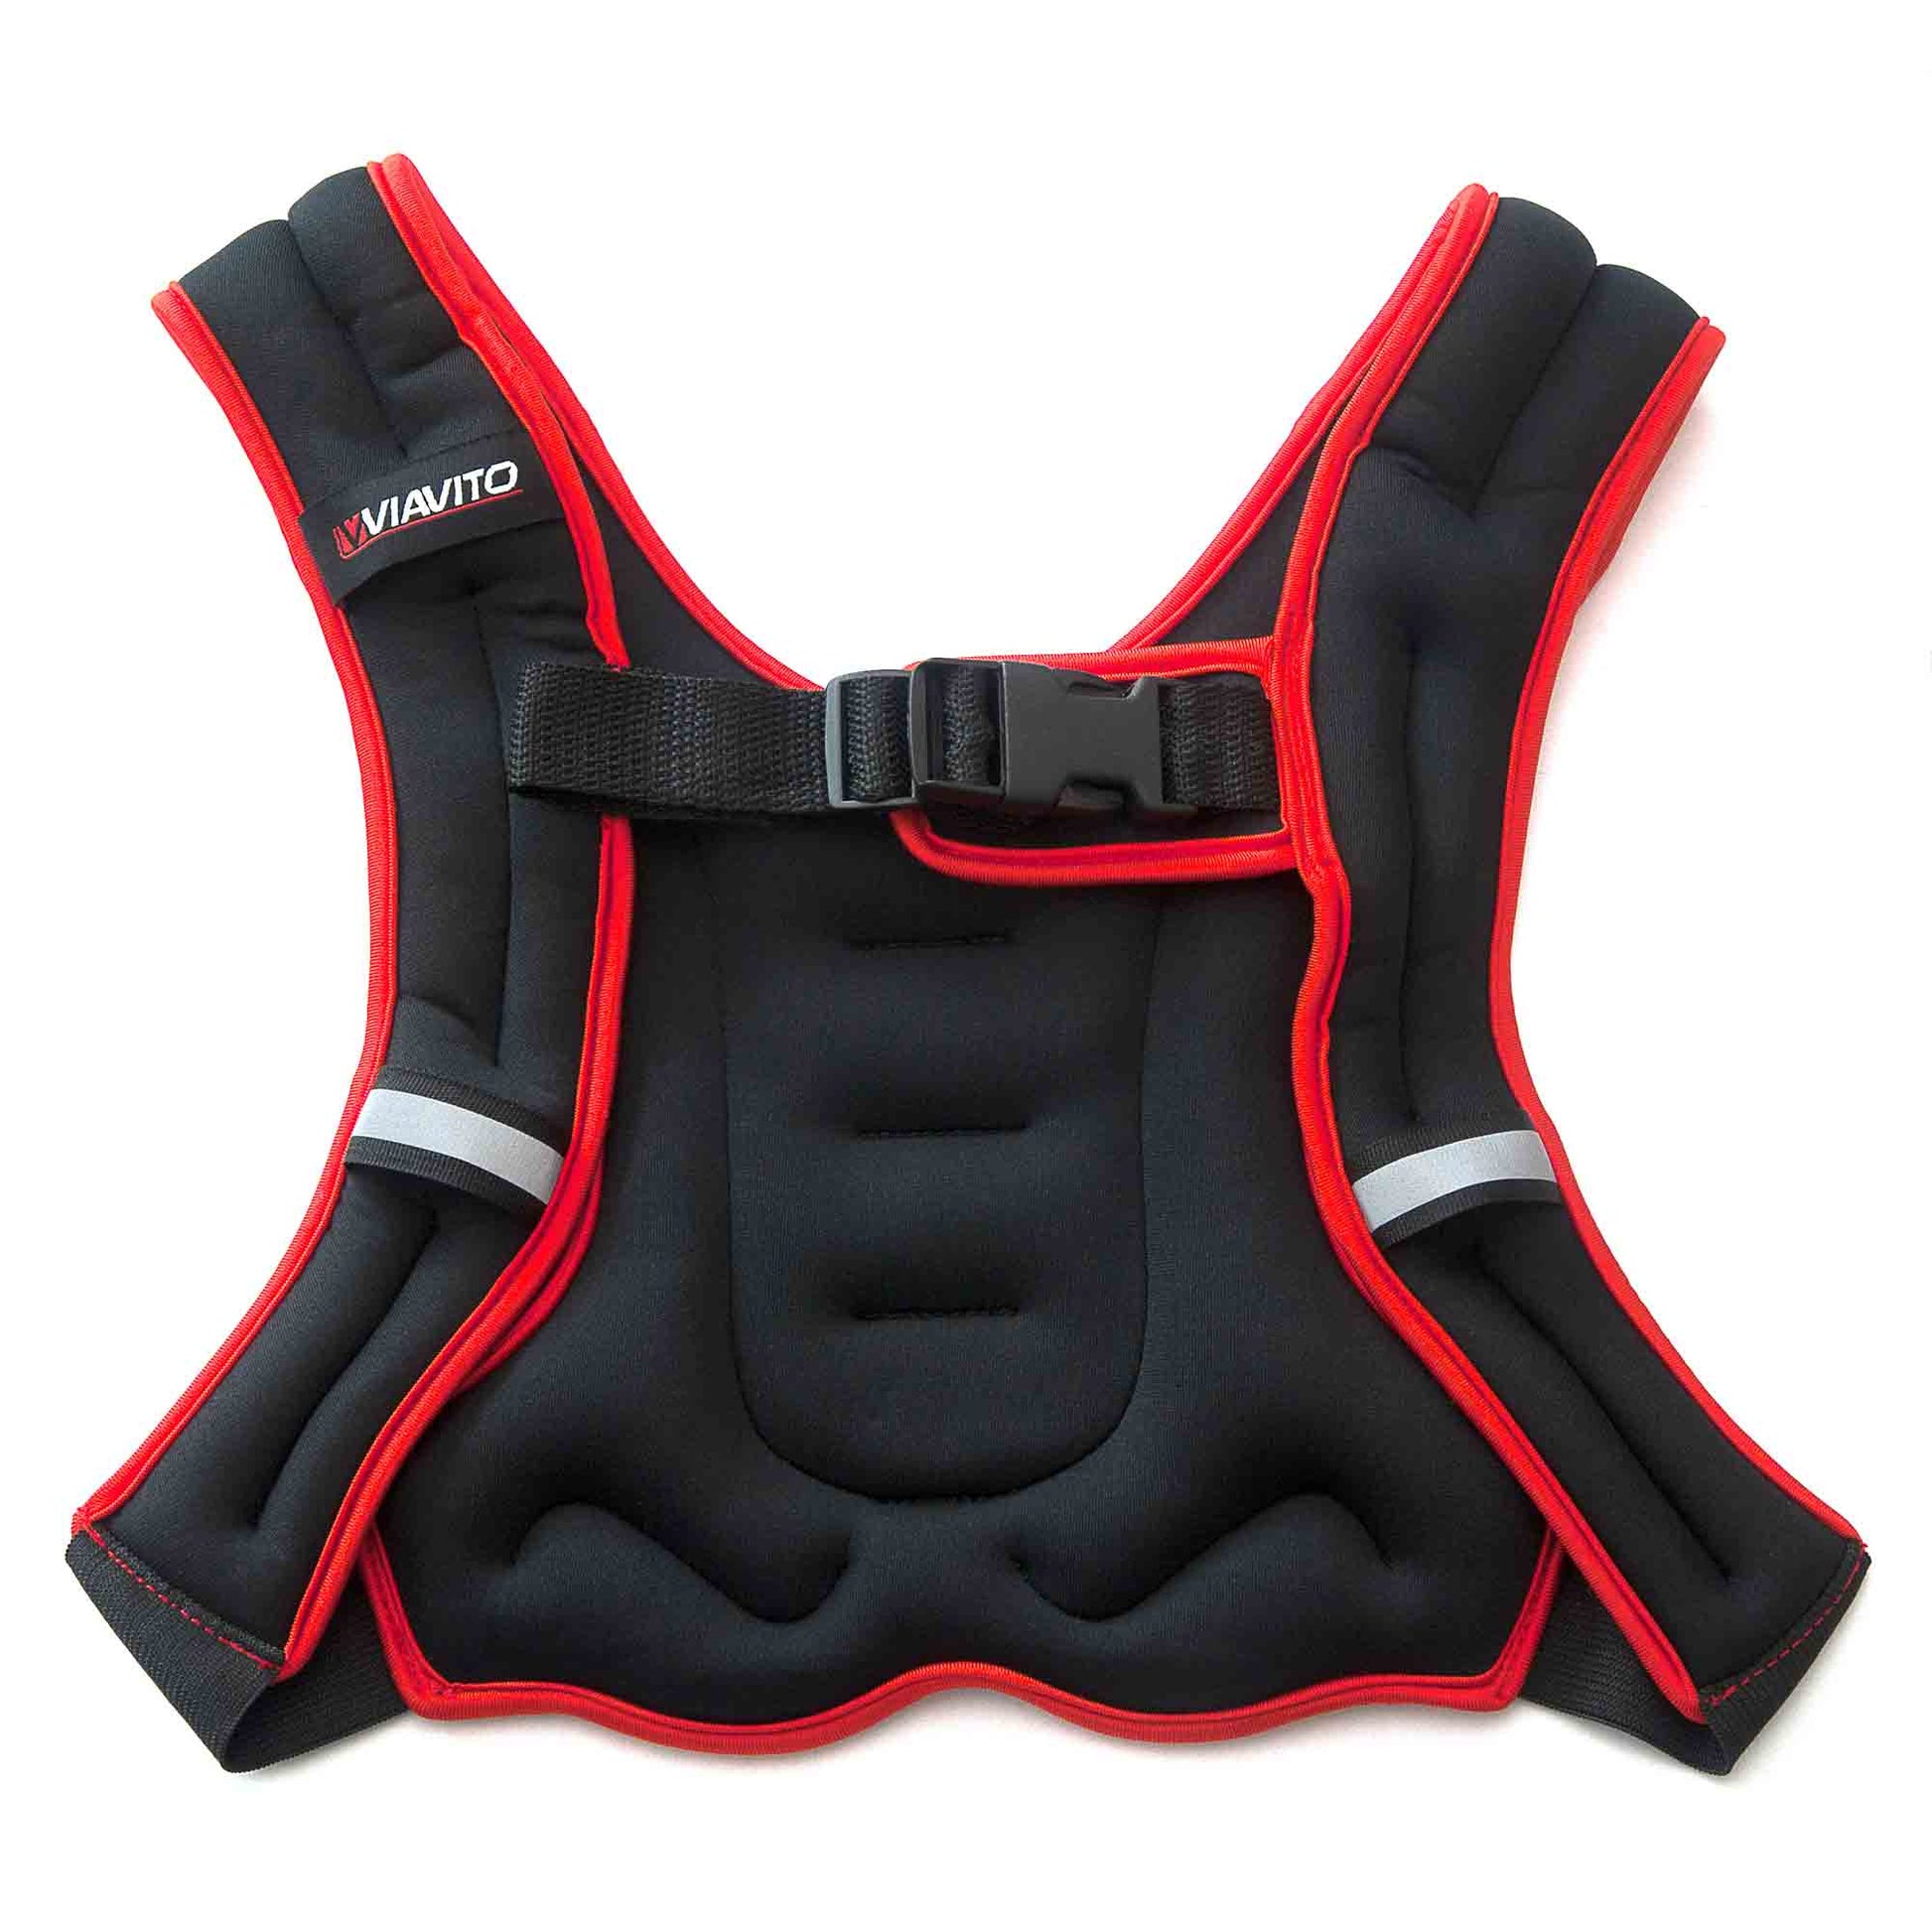 Viavito 2.5kg Weighted Vest